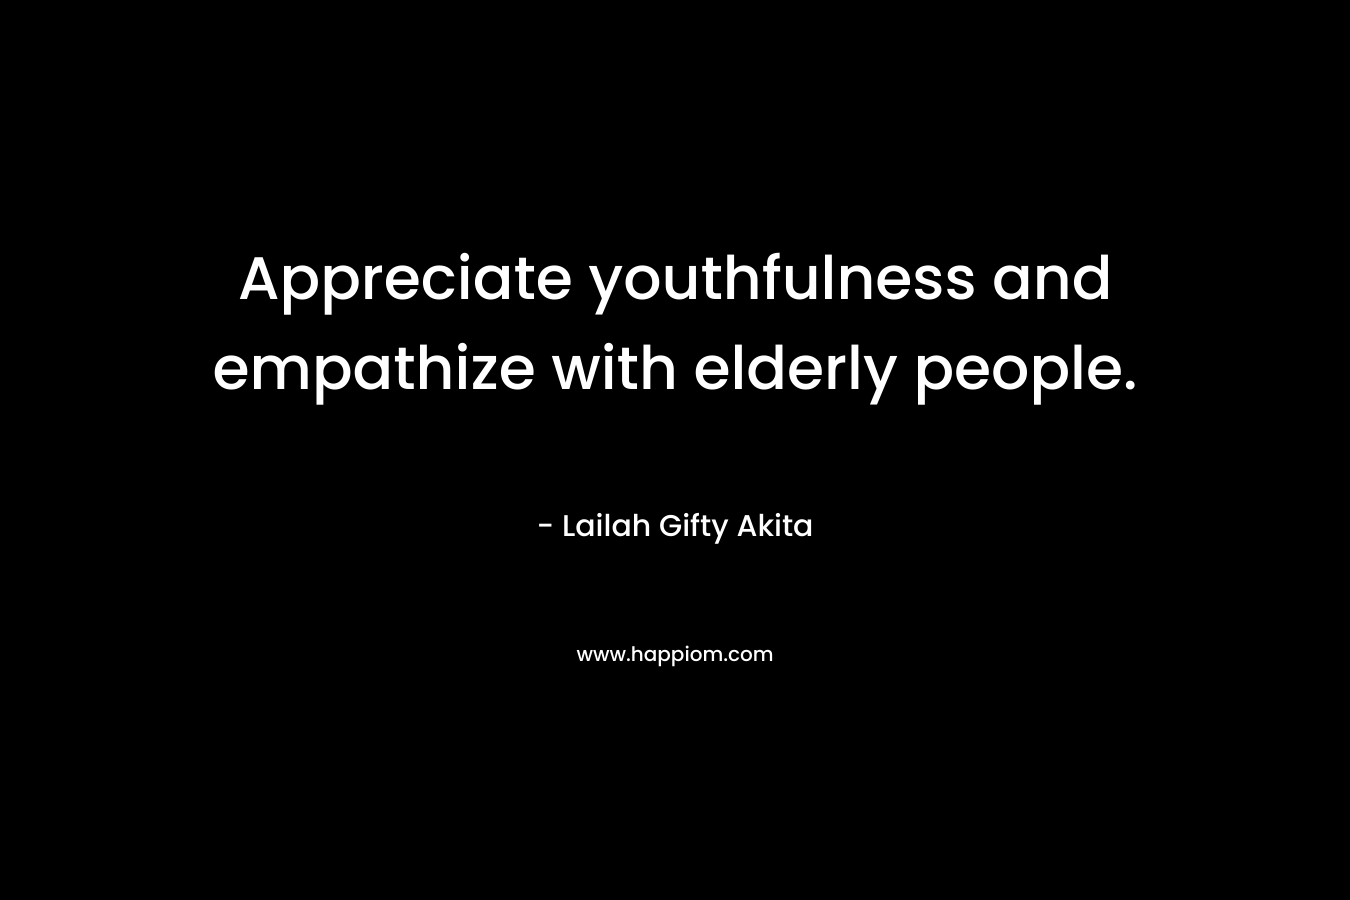 Appreciate youthfulness and empathize with elderly people. – Lailah Gifty Akita